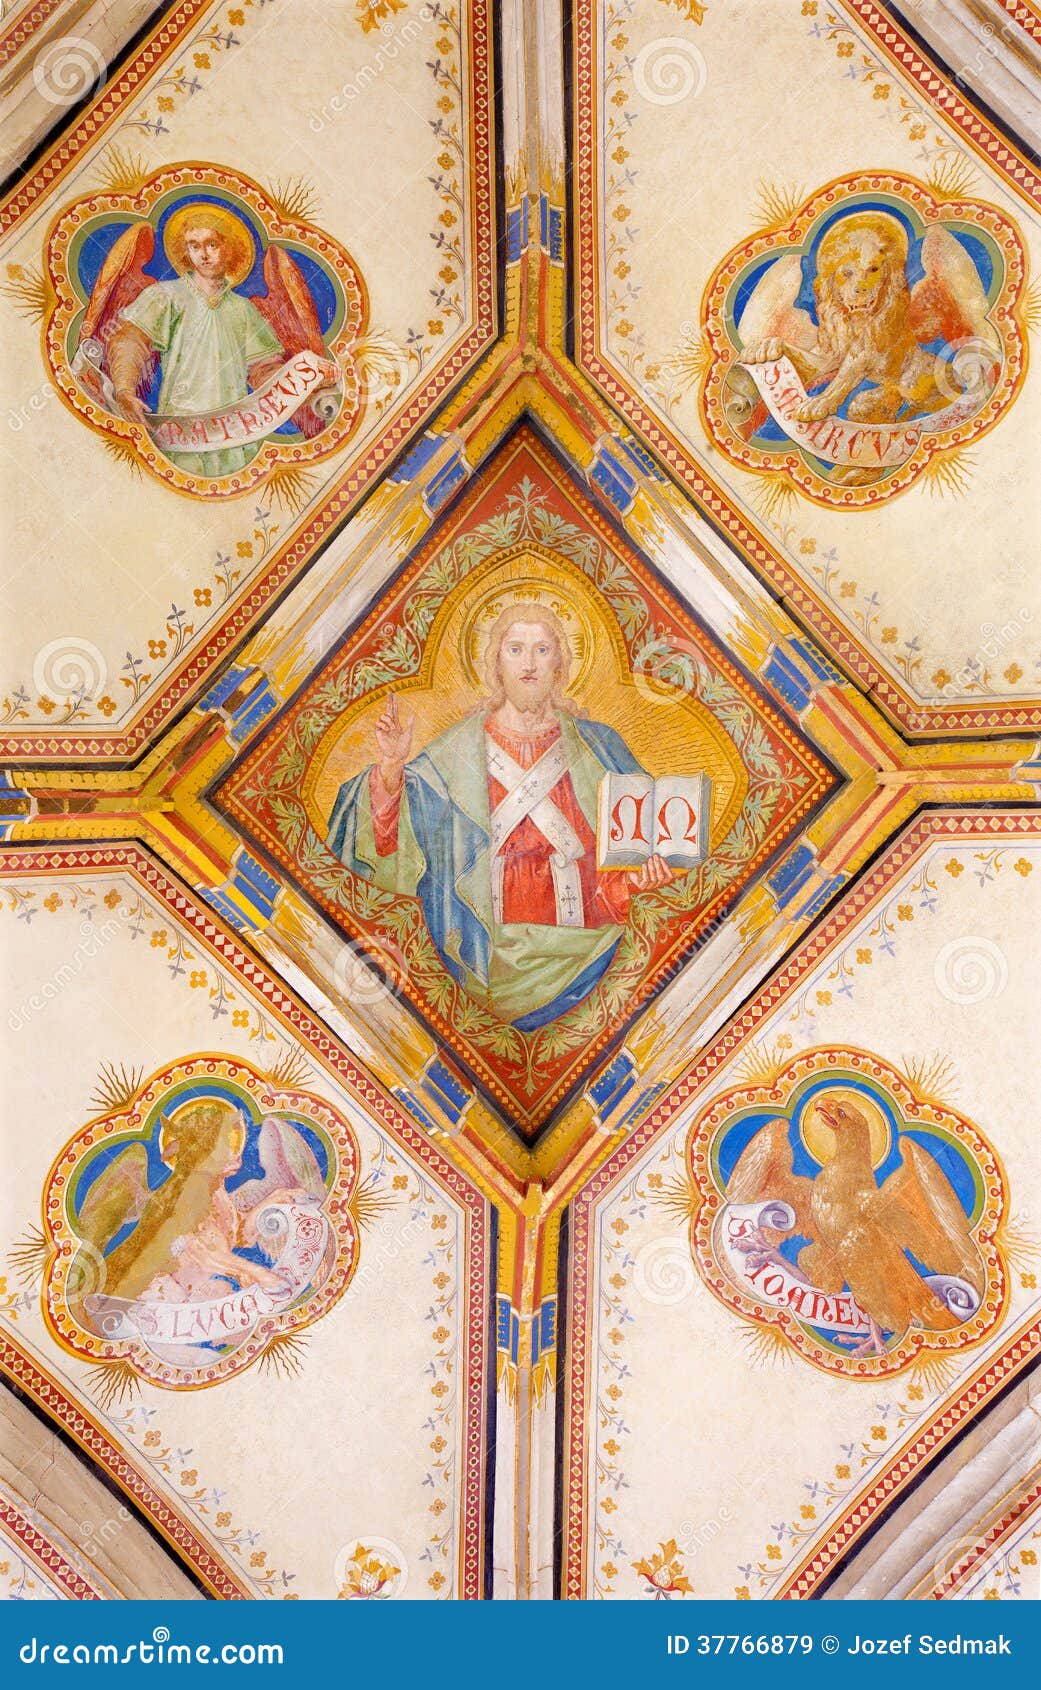 The 4 Evangelists And Their Symbols